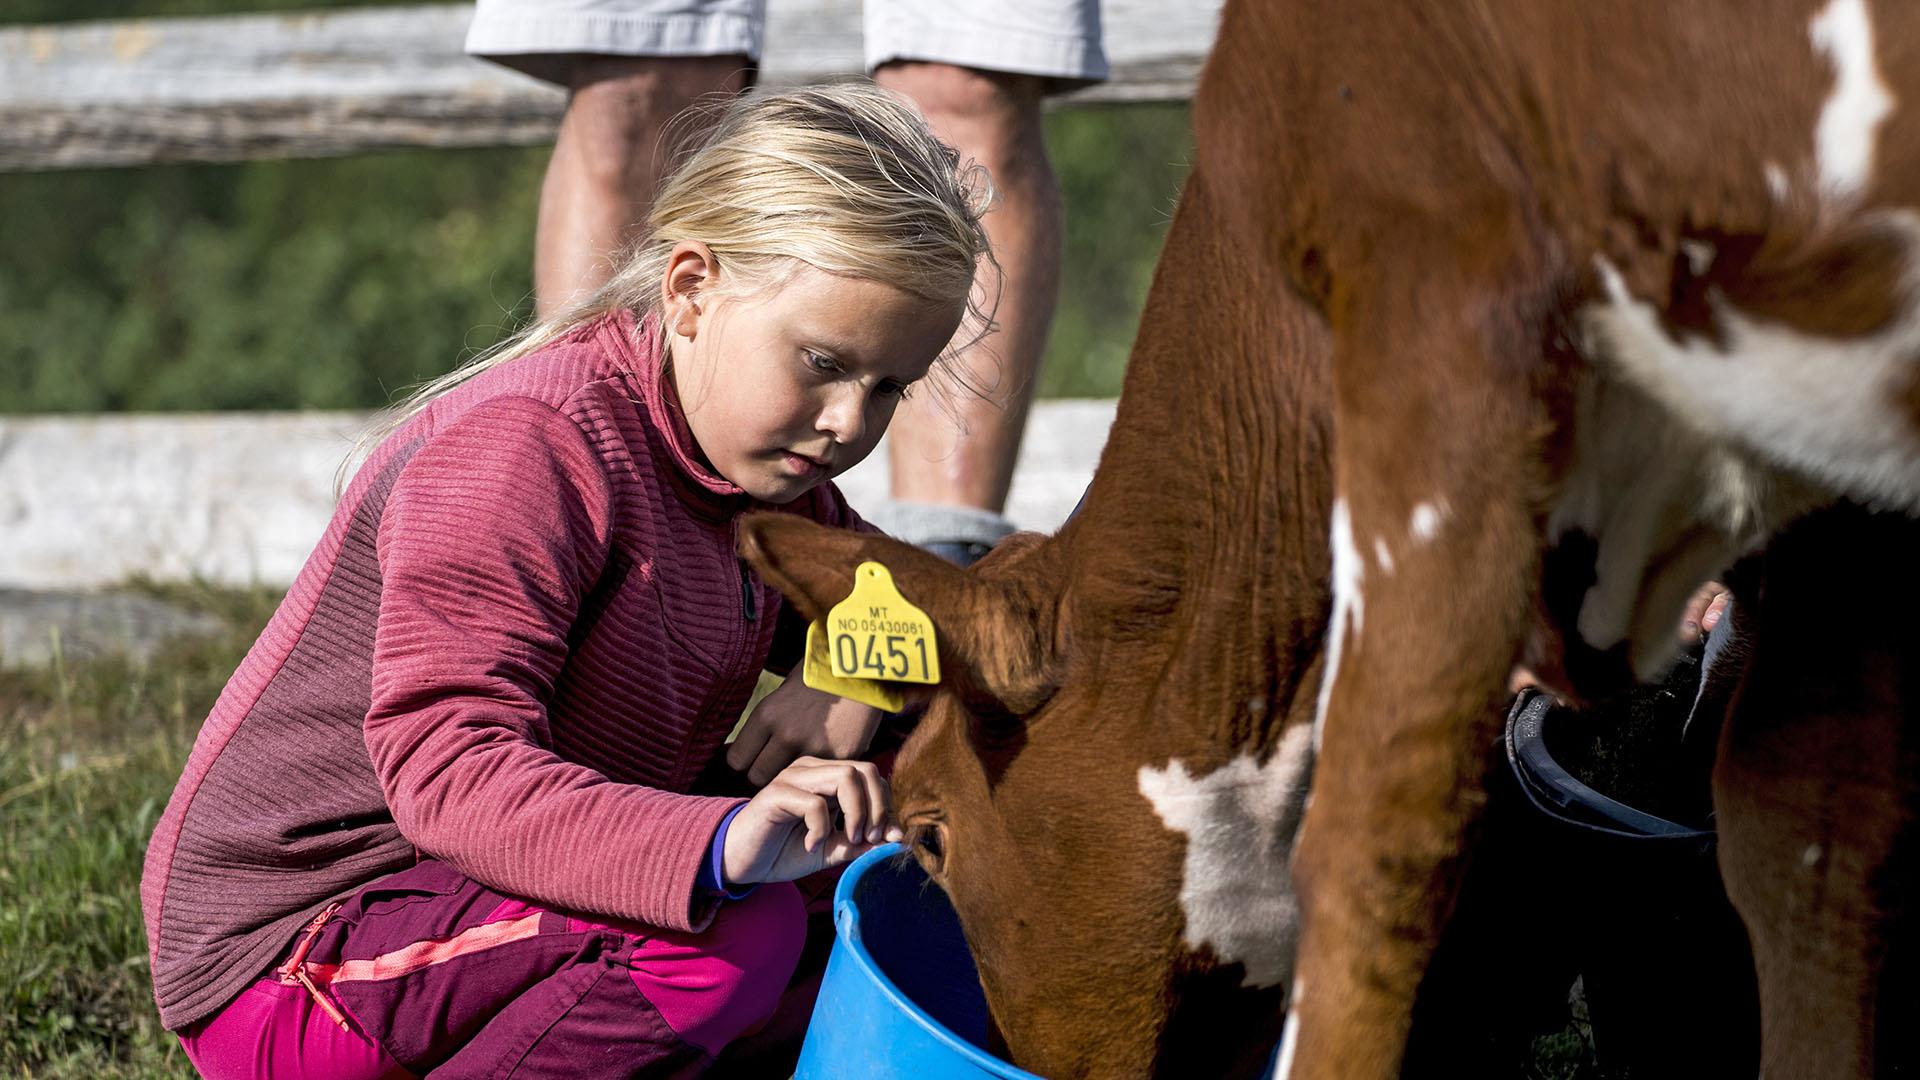 A girl in pink jacket and pants feeds a calf out of a blue bucket.